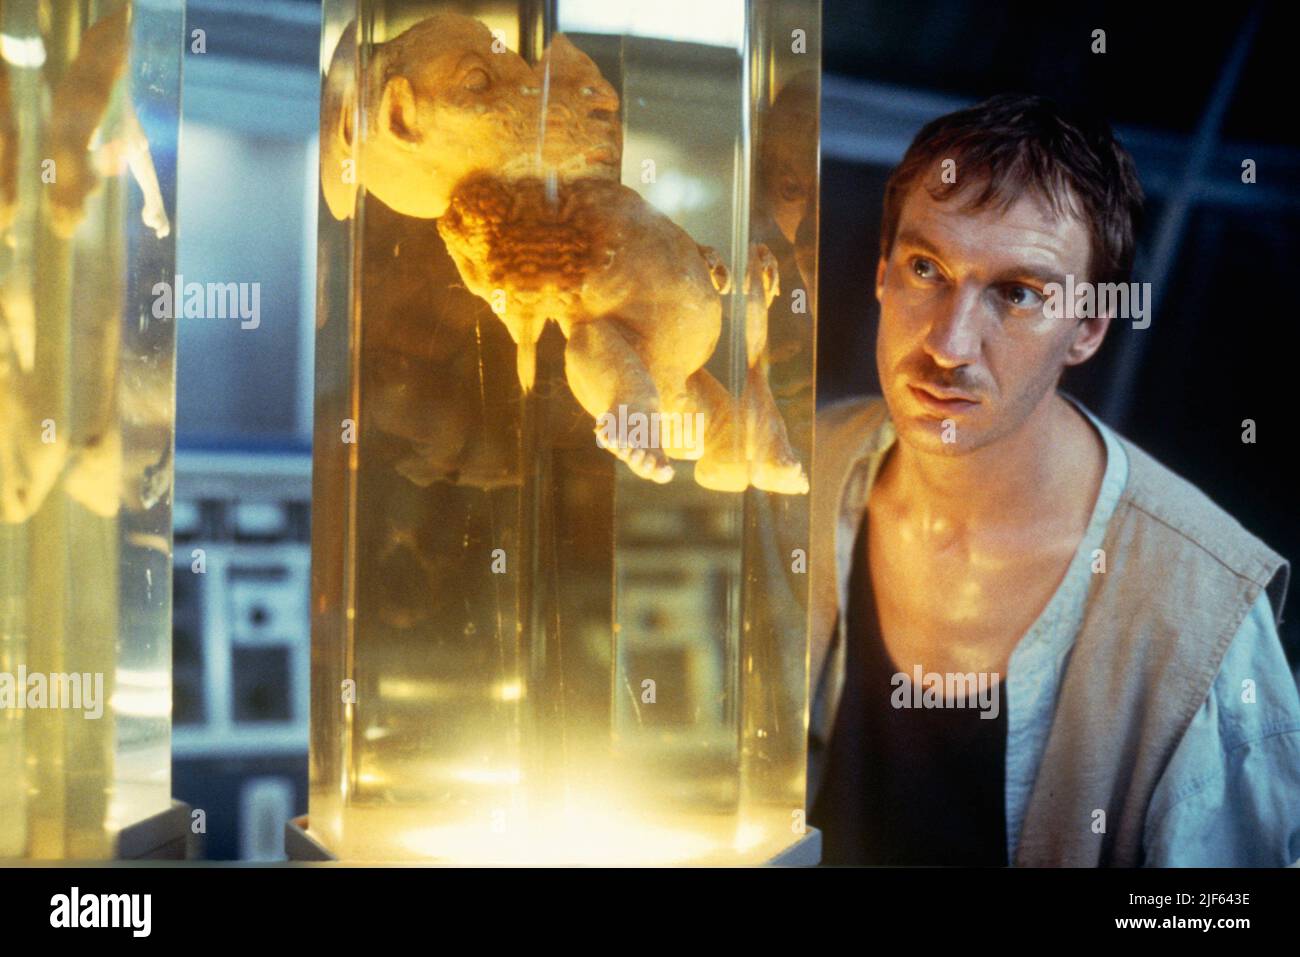 DAVID THEWLIS in THE ISLAND OF DR MOREAU (1996), directed by JOHN FRANKENHEIMER. Credit: NEW LINE CINEMA / Album Stock Photo